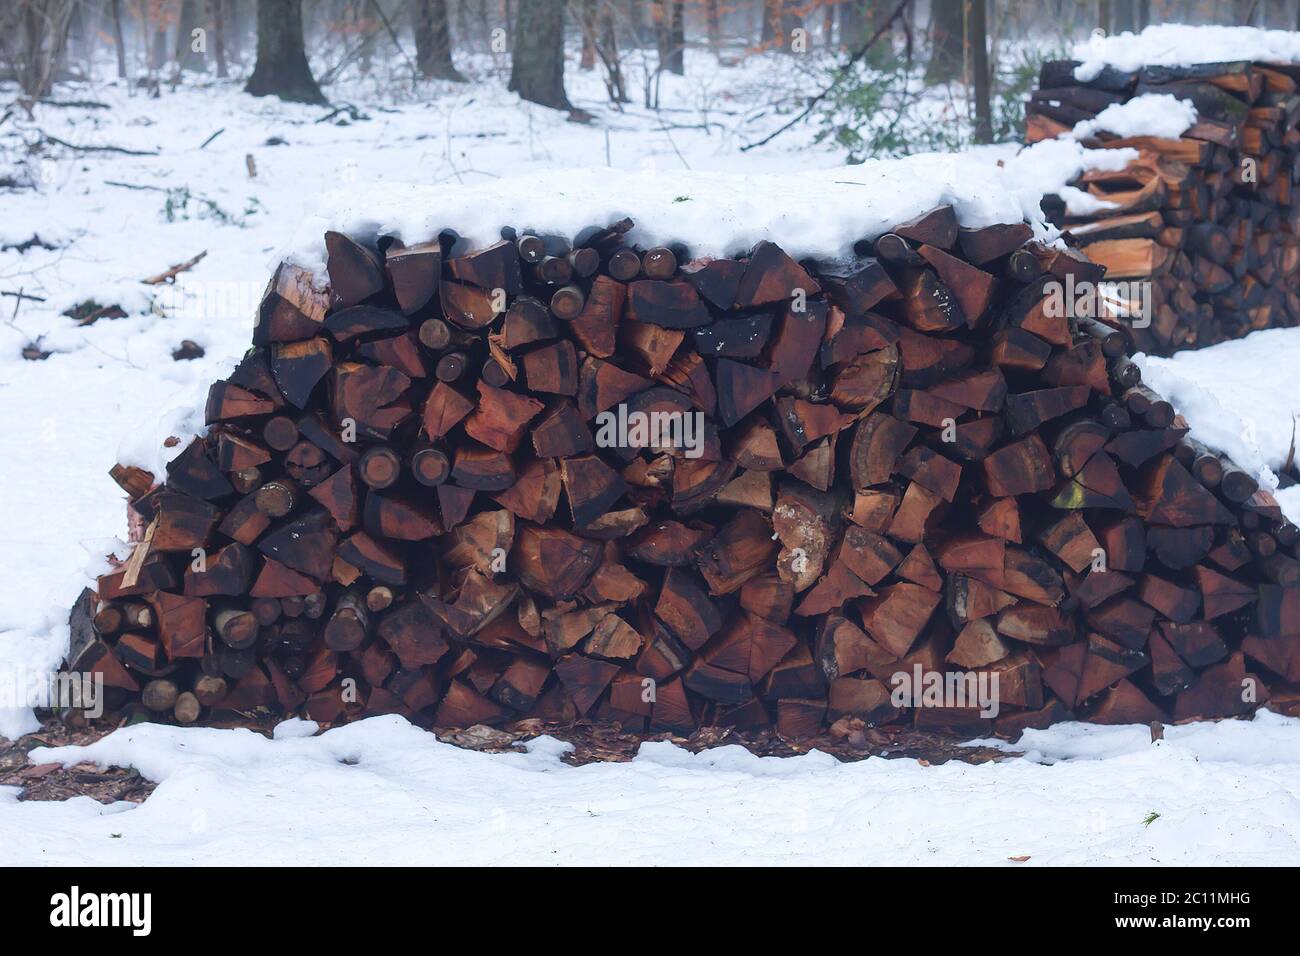 Pile of wooden logs in a snowy forest Stock Photo